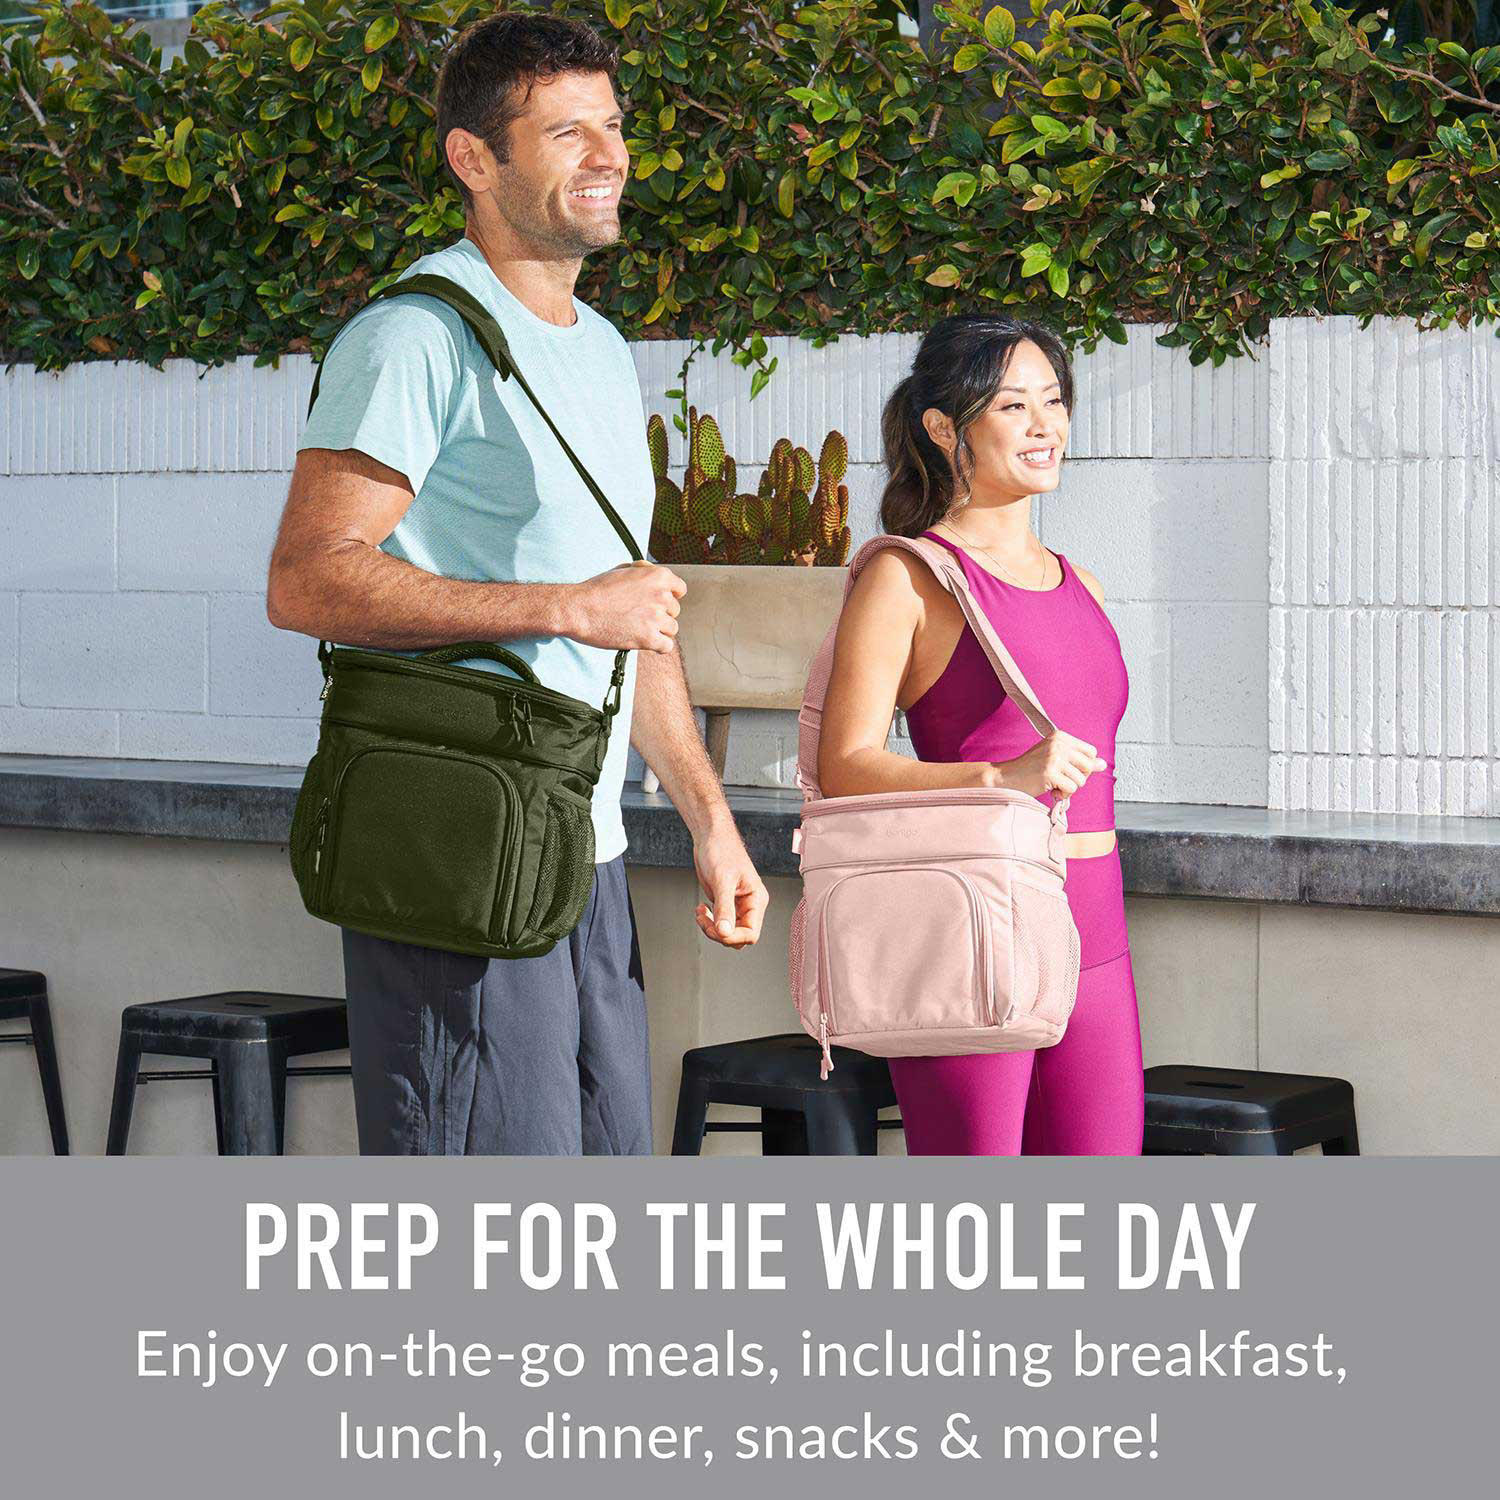 https://bigbigmart.com/wp-content/uploads/2022/07/Bentgo%C2%AE-Prep-Deluxe-Multimeal-Bag-Premium-Insulation-up-to-8-Hrs-with-Water-Resistant-Exterior-Interior-Extra-Large-Lunch-Bag-Holds-4-Meals-Snacks-Great-for-All-Day-Meal-Prep-Blush11.jpg